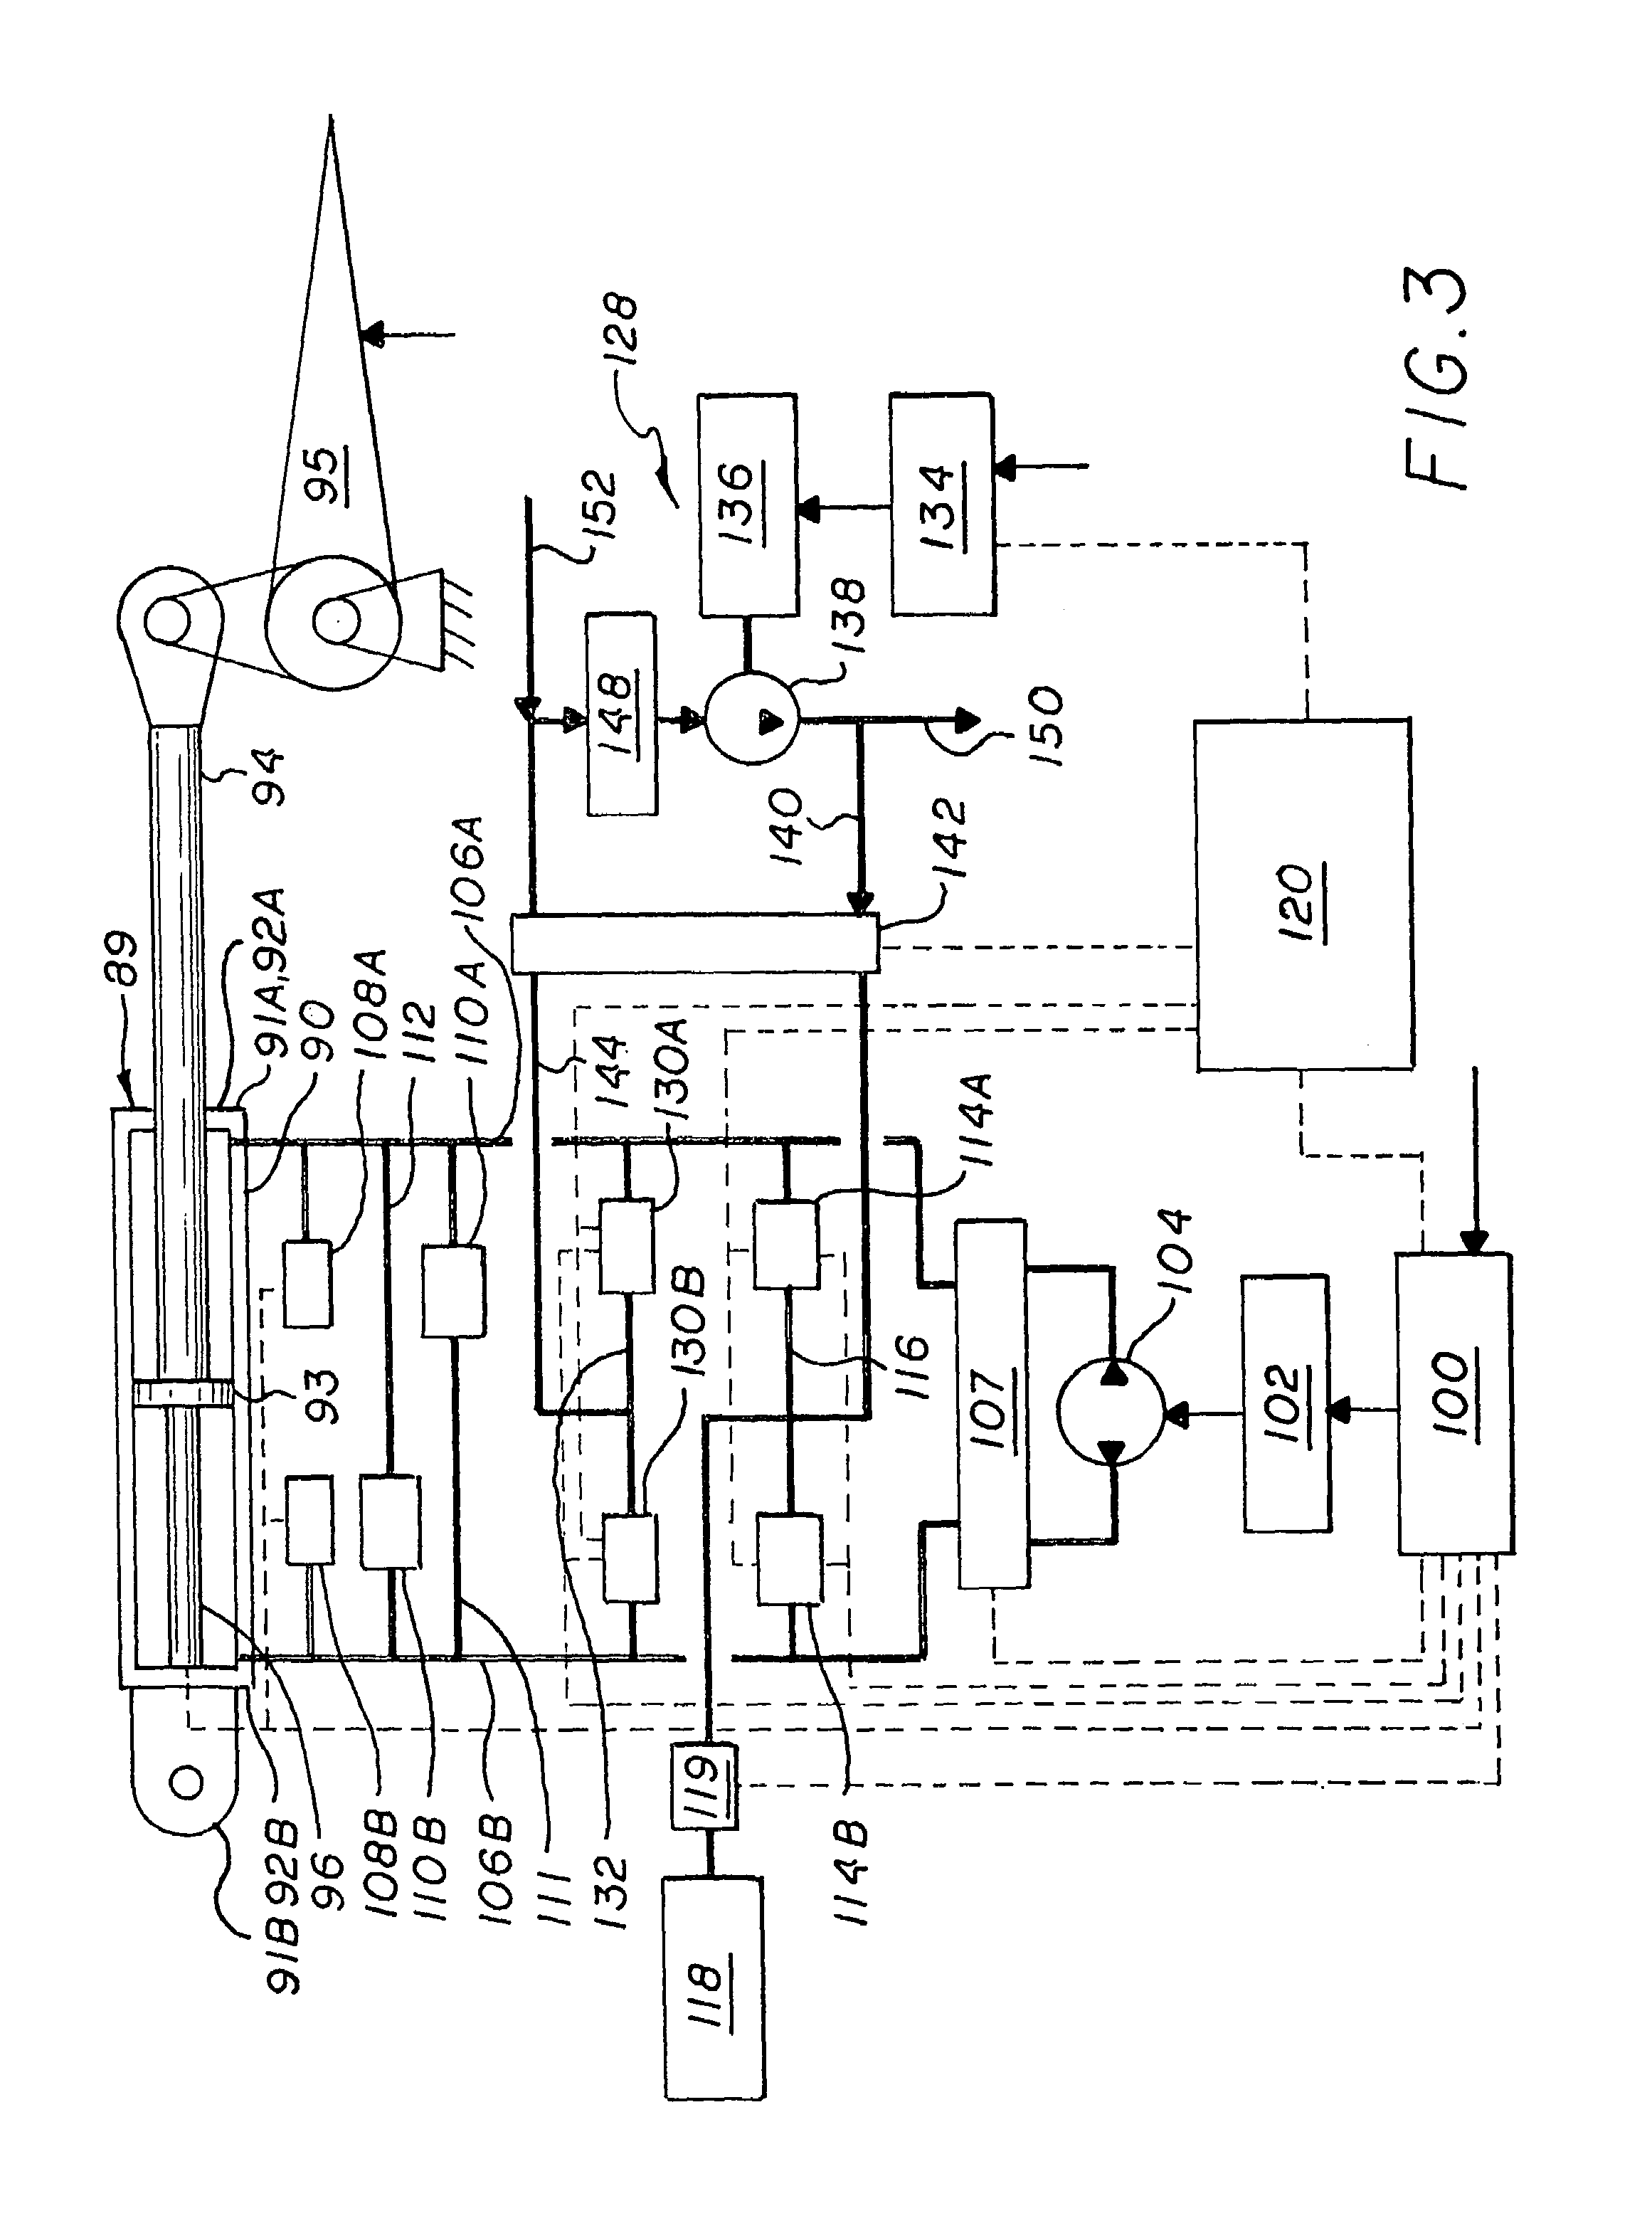 Electro-hydraulic actuator system